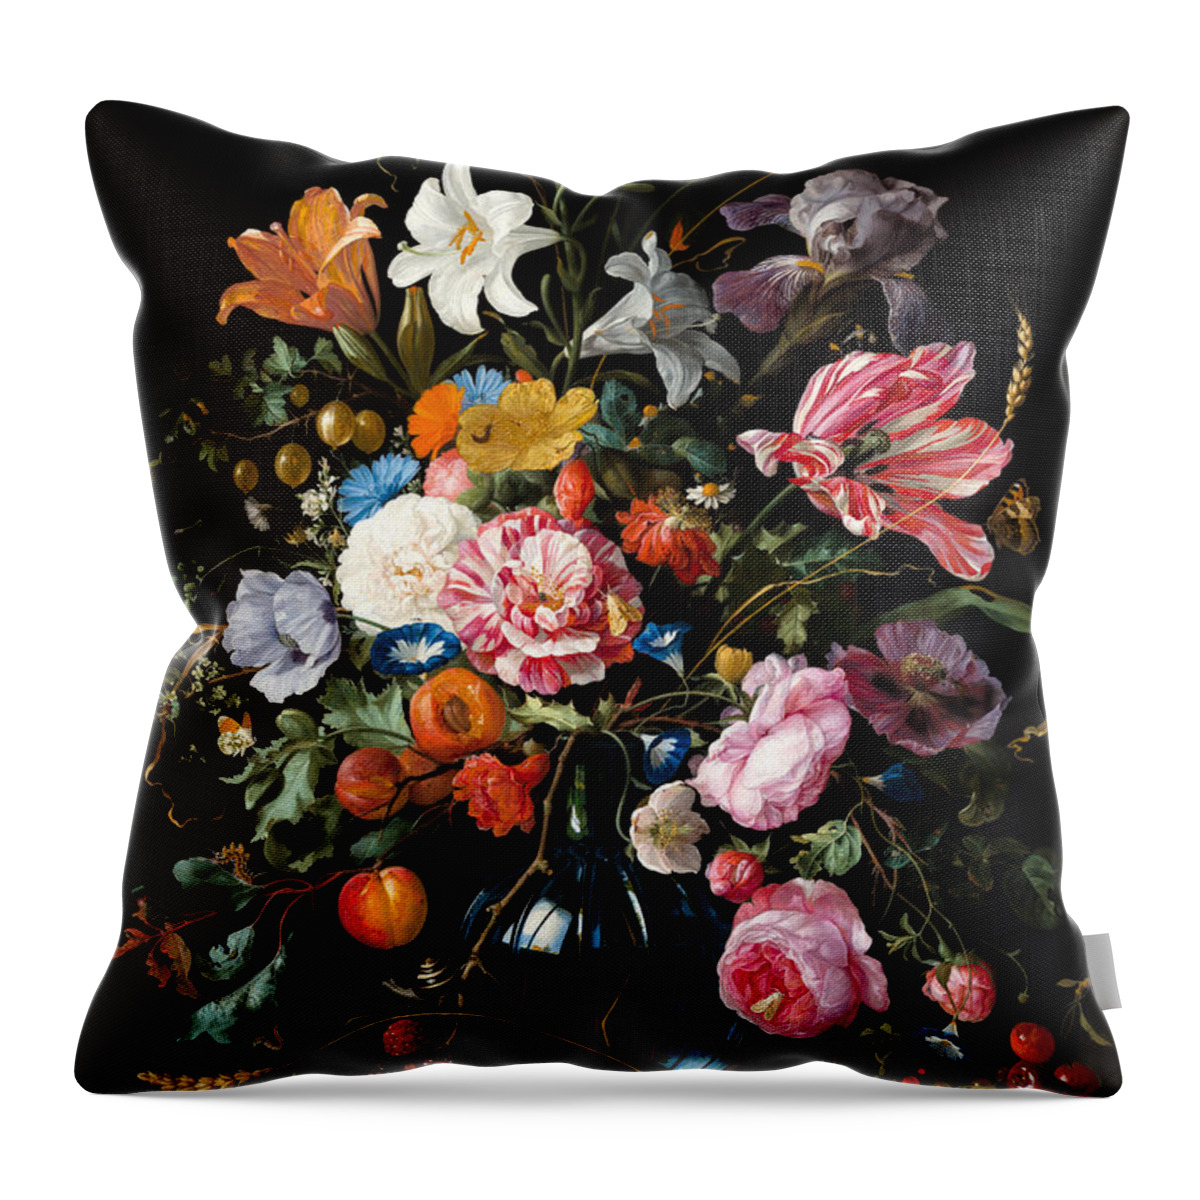 Oil Painting Throw Pillow featuring the painting Dutch Still Life #2 by Vasula Tsongas